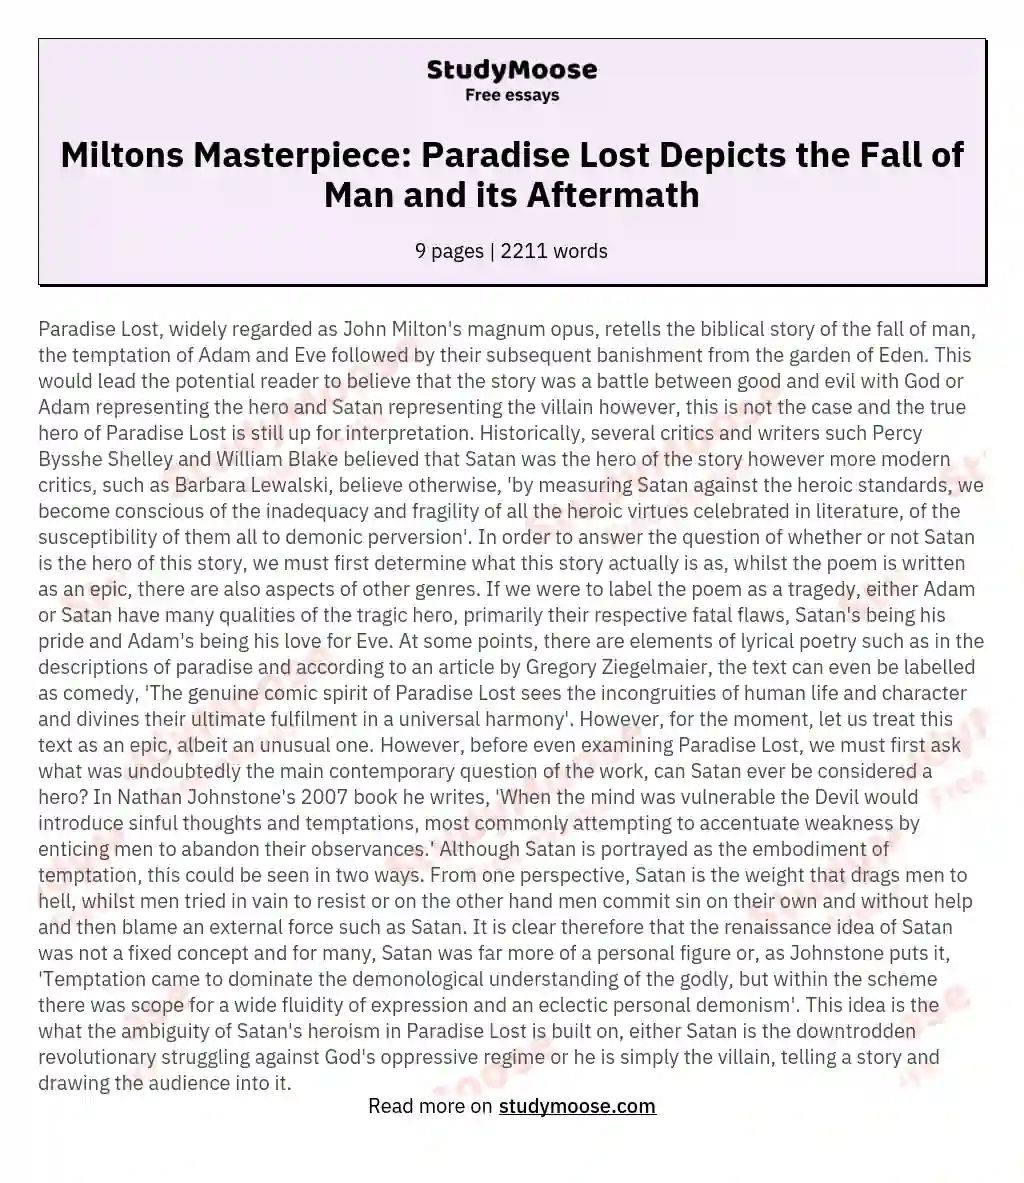 Miltons Masterpiece: Paradise Lost Depicts the Fall of Man and its Aftermath essay